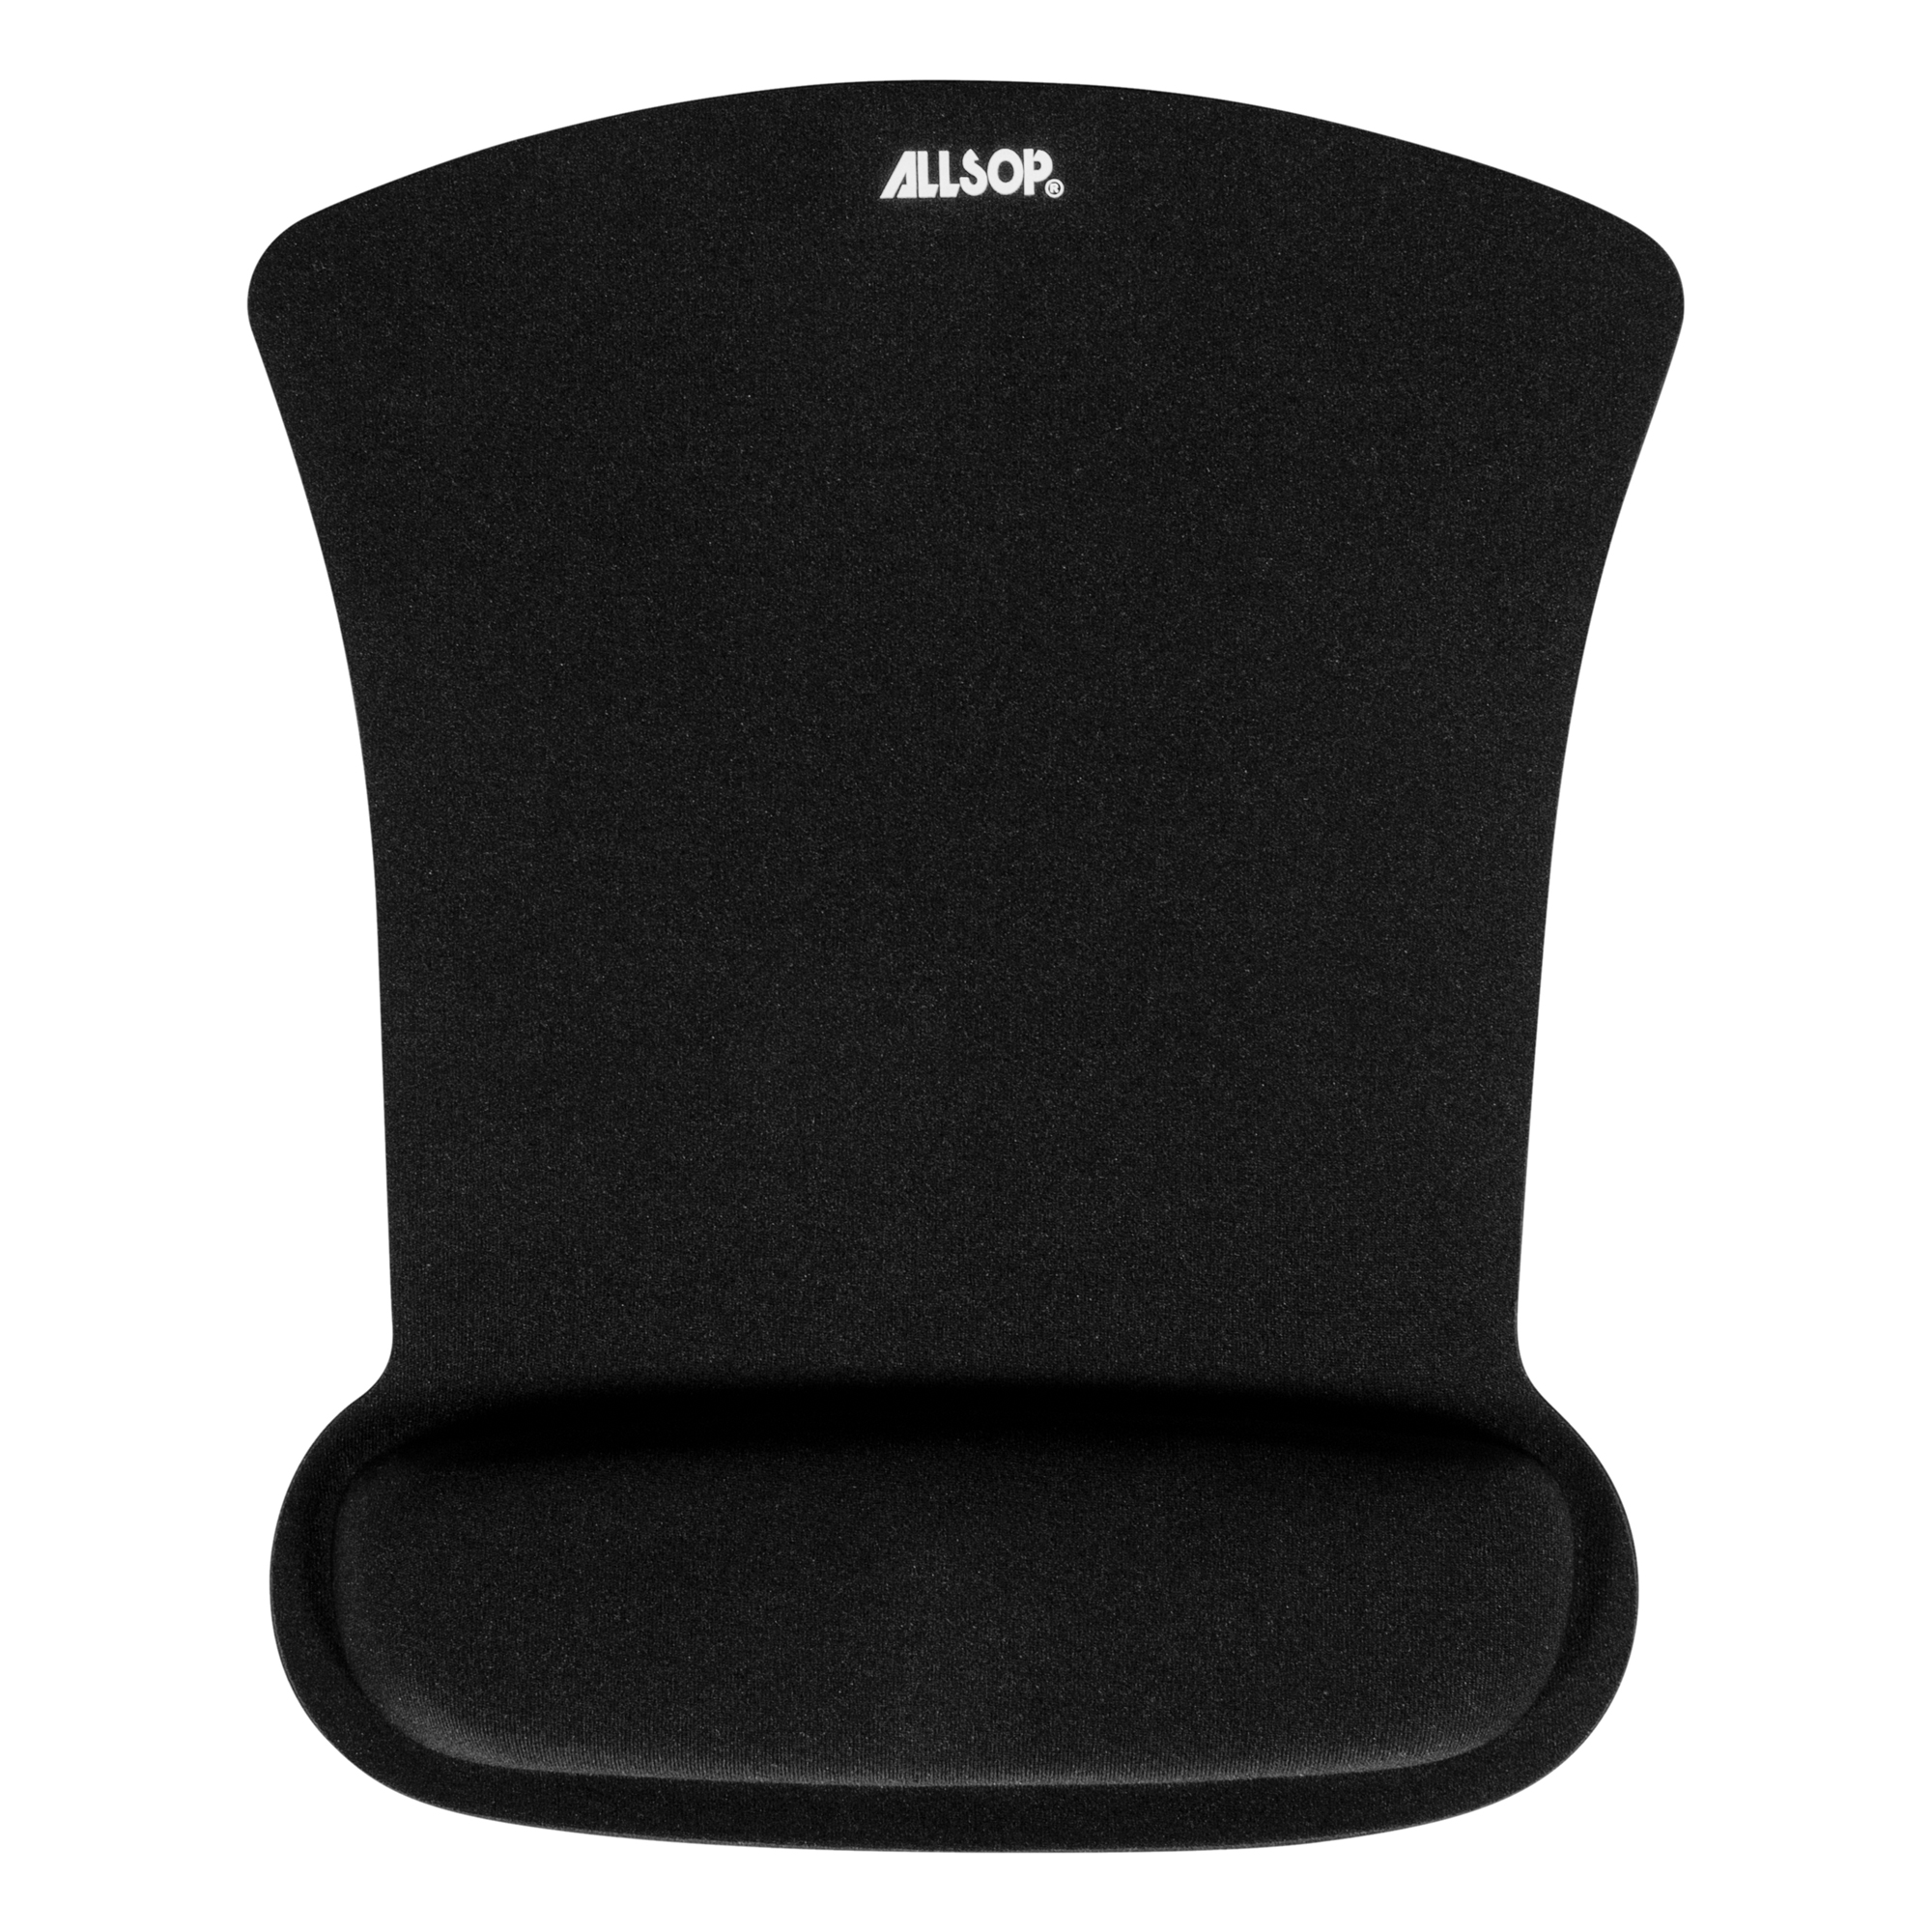 Gel Mouse Pad with Wrist Rest – Black – (05679)